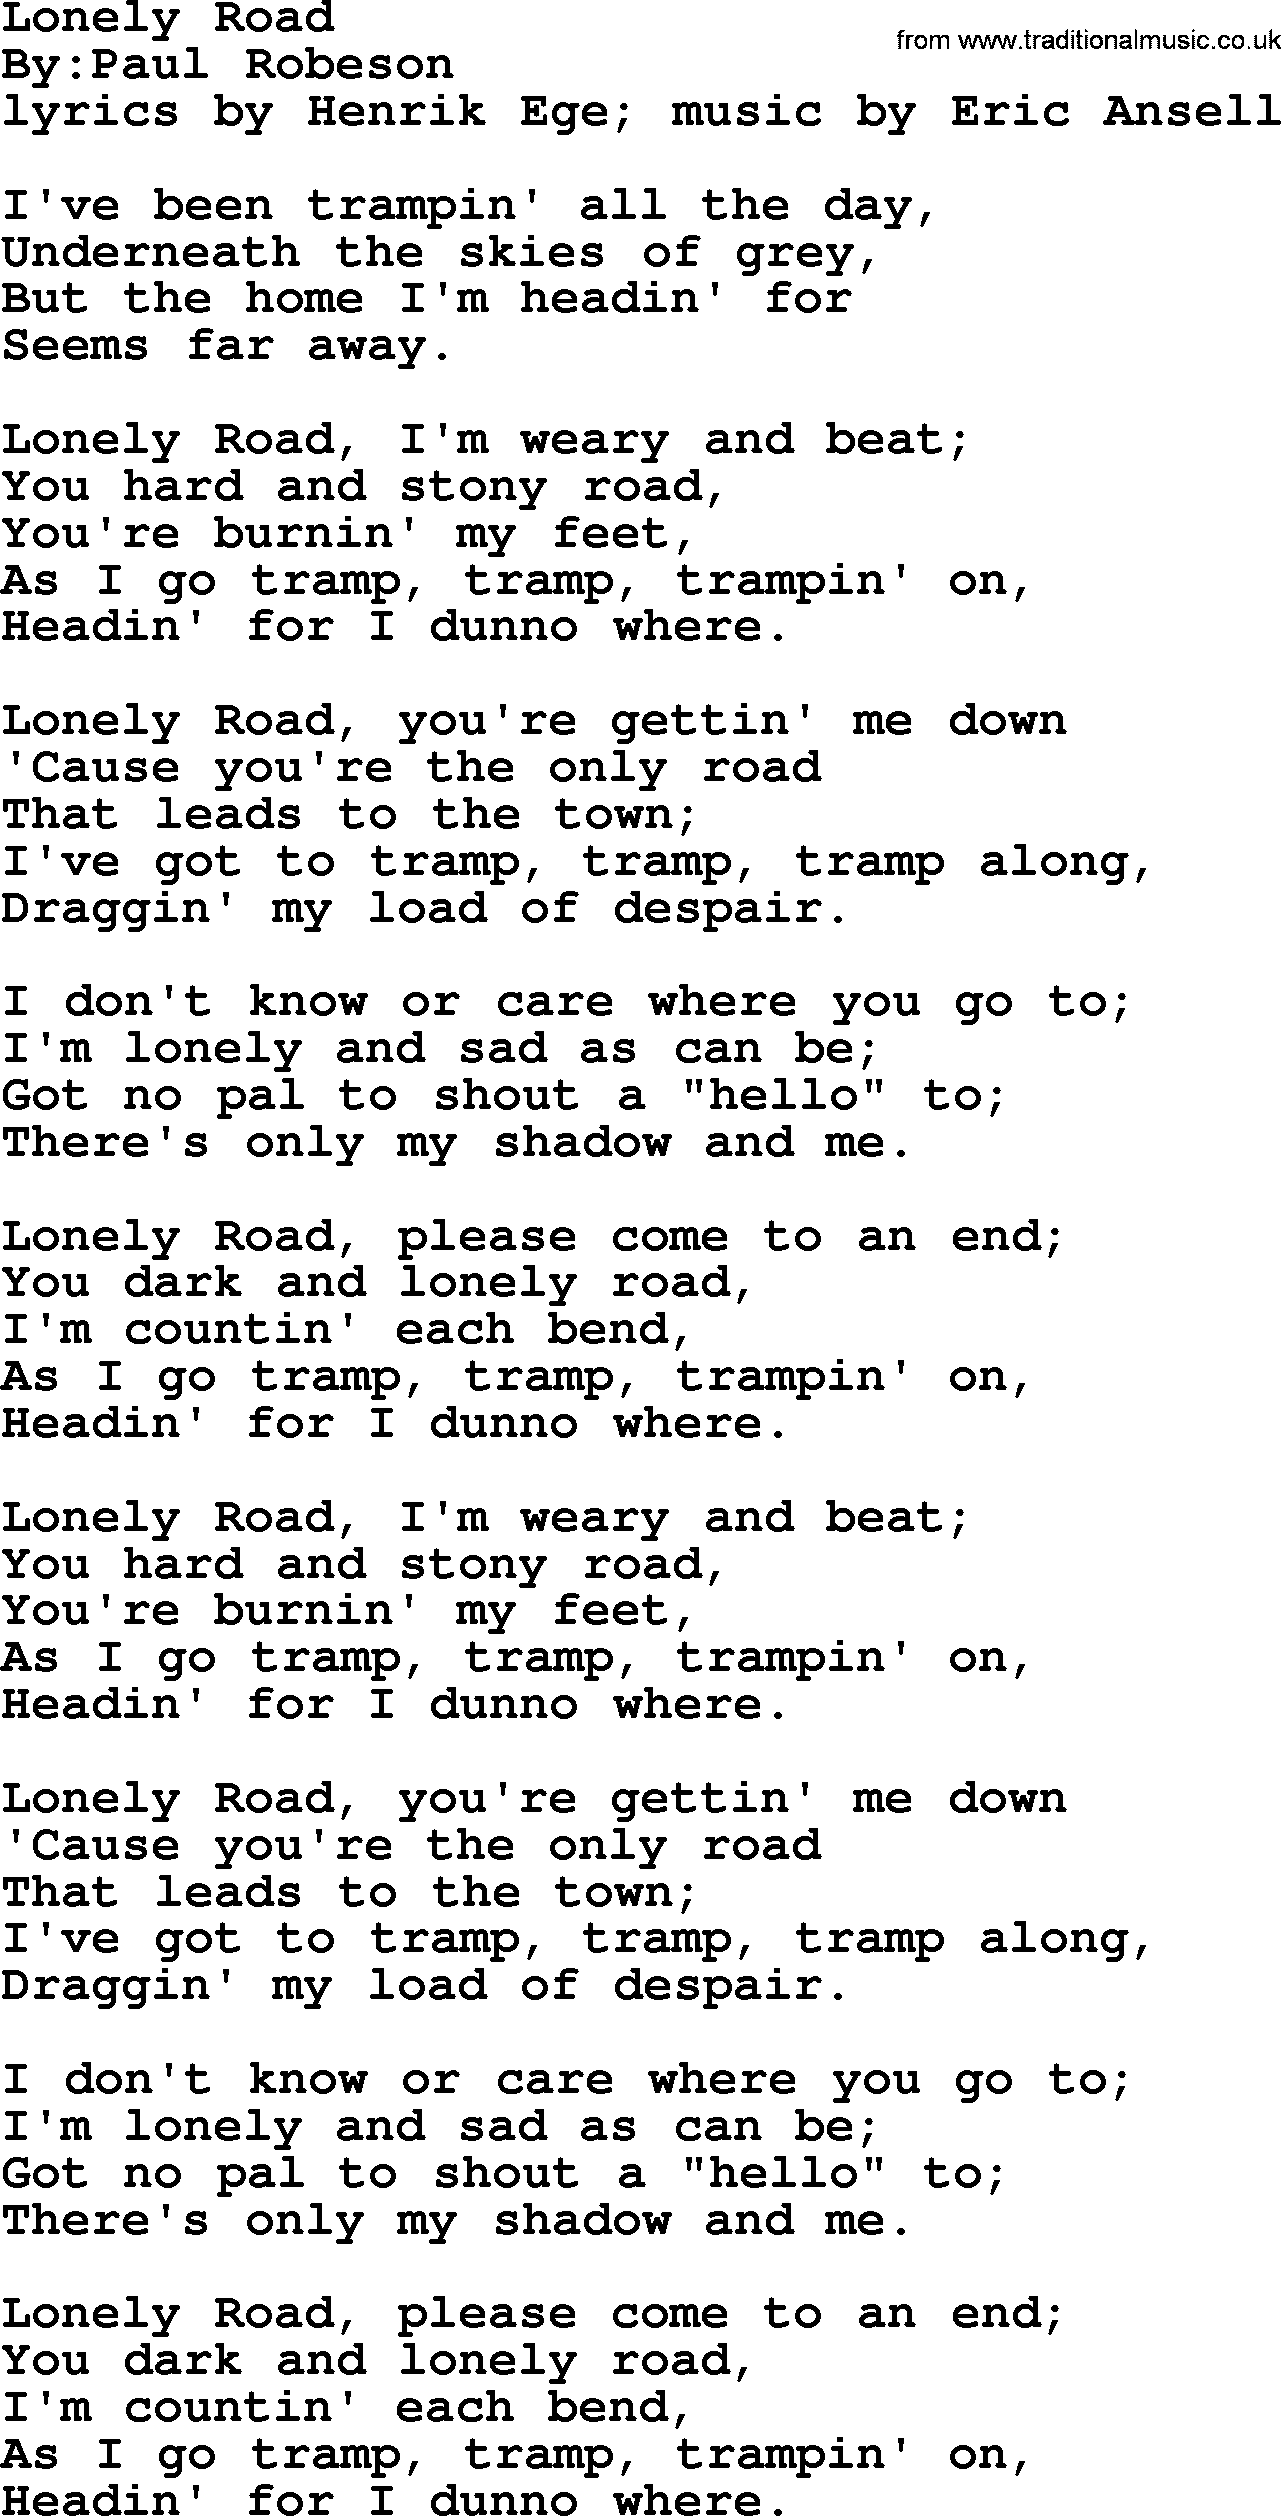 Political, Solidarity, Workers or Union song: Lonely Road, lyrics